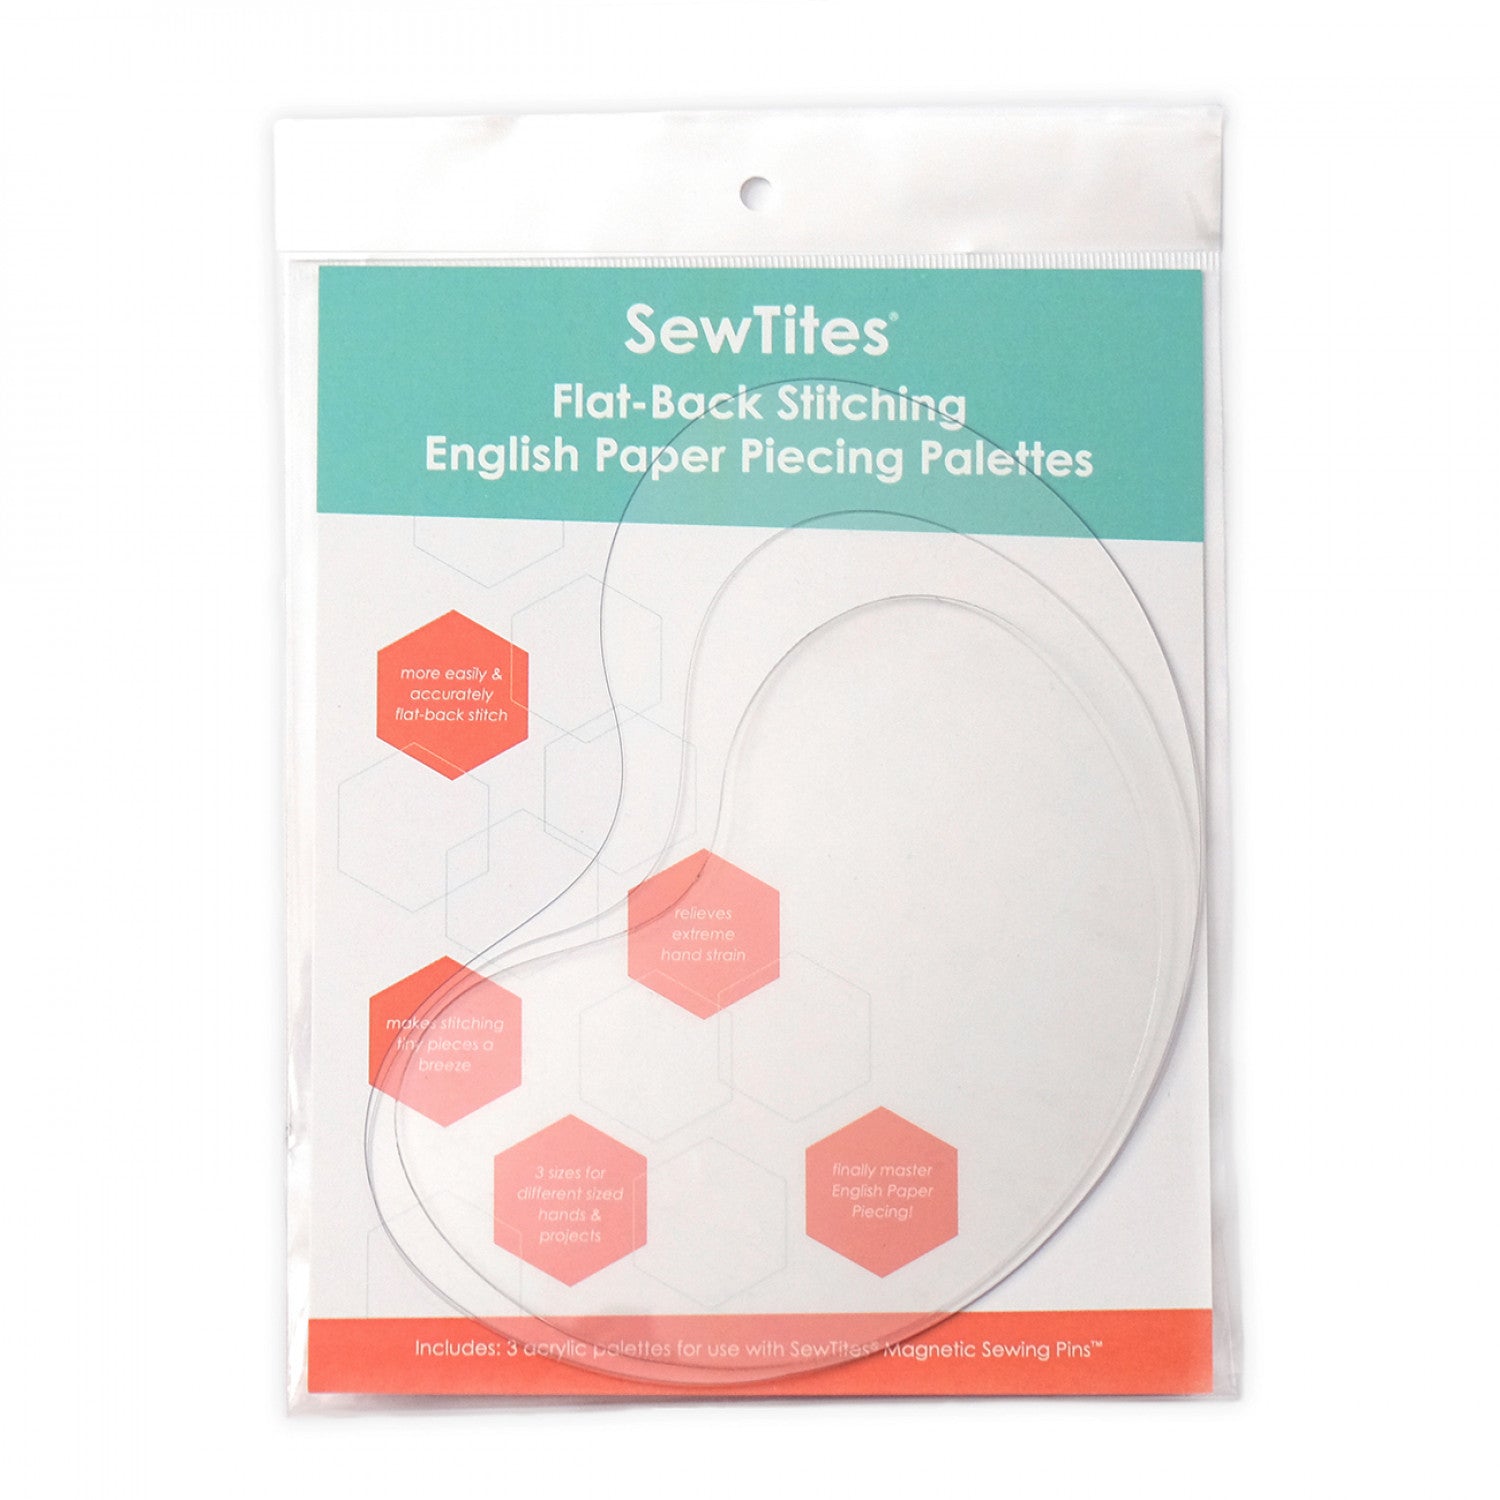 SewTites Hand Mix - Magnetic Sewing Pins 12-Pack